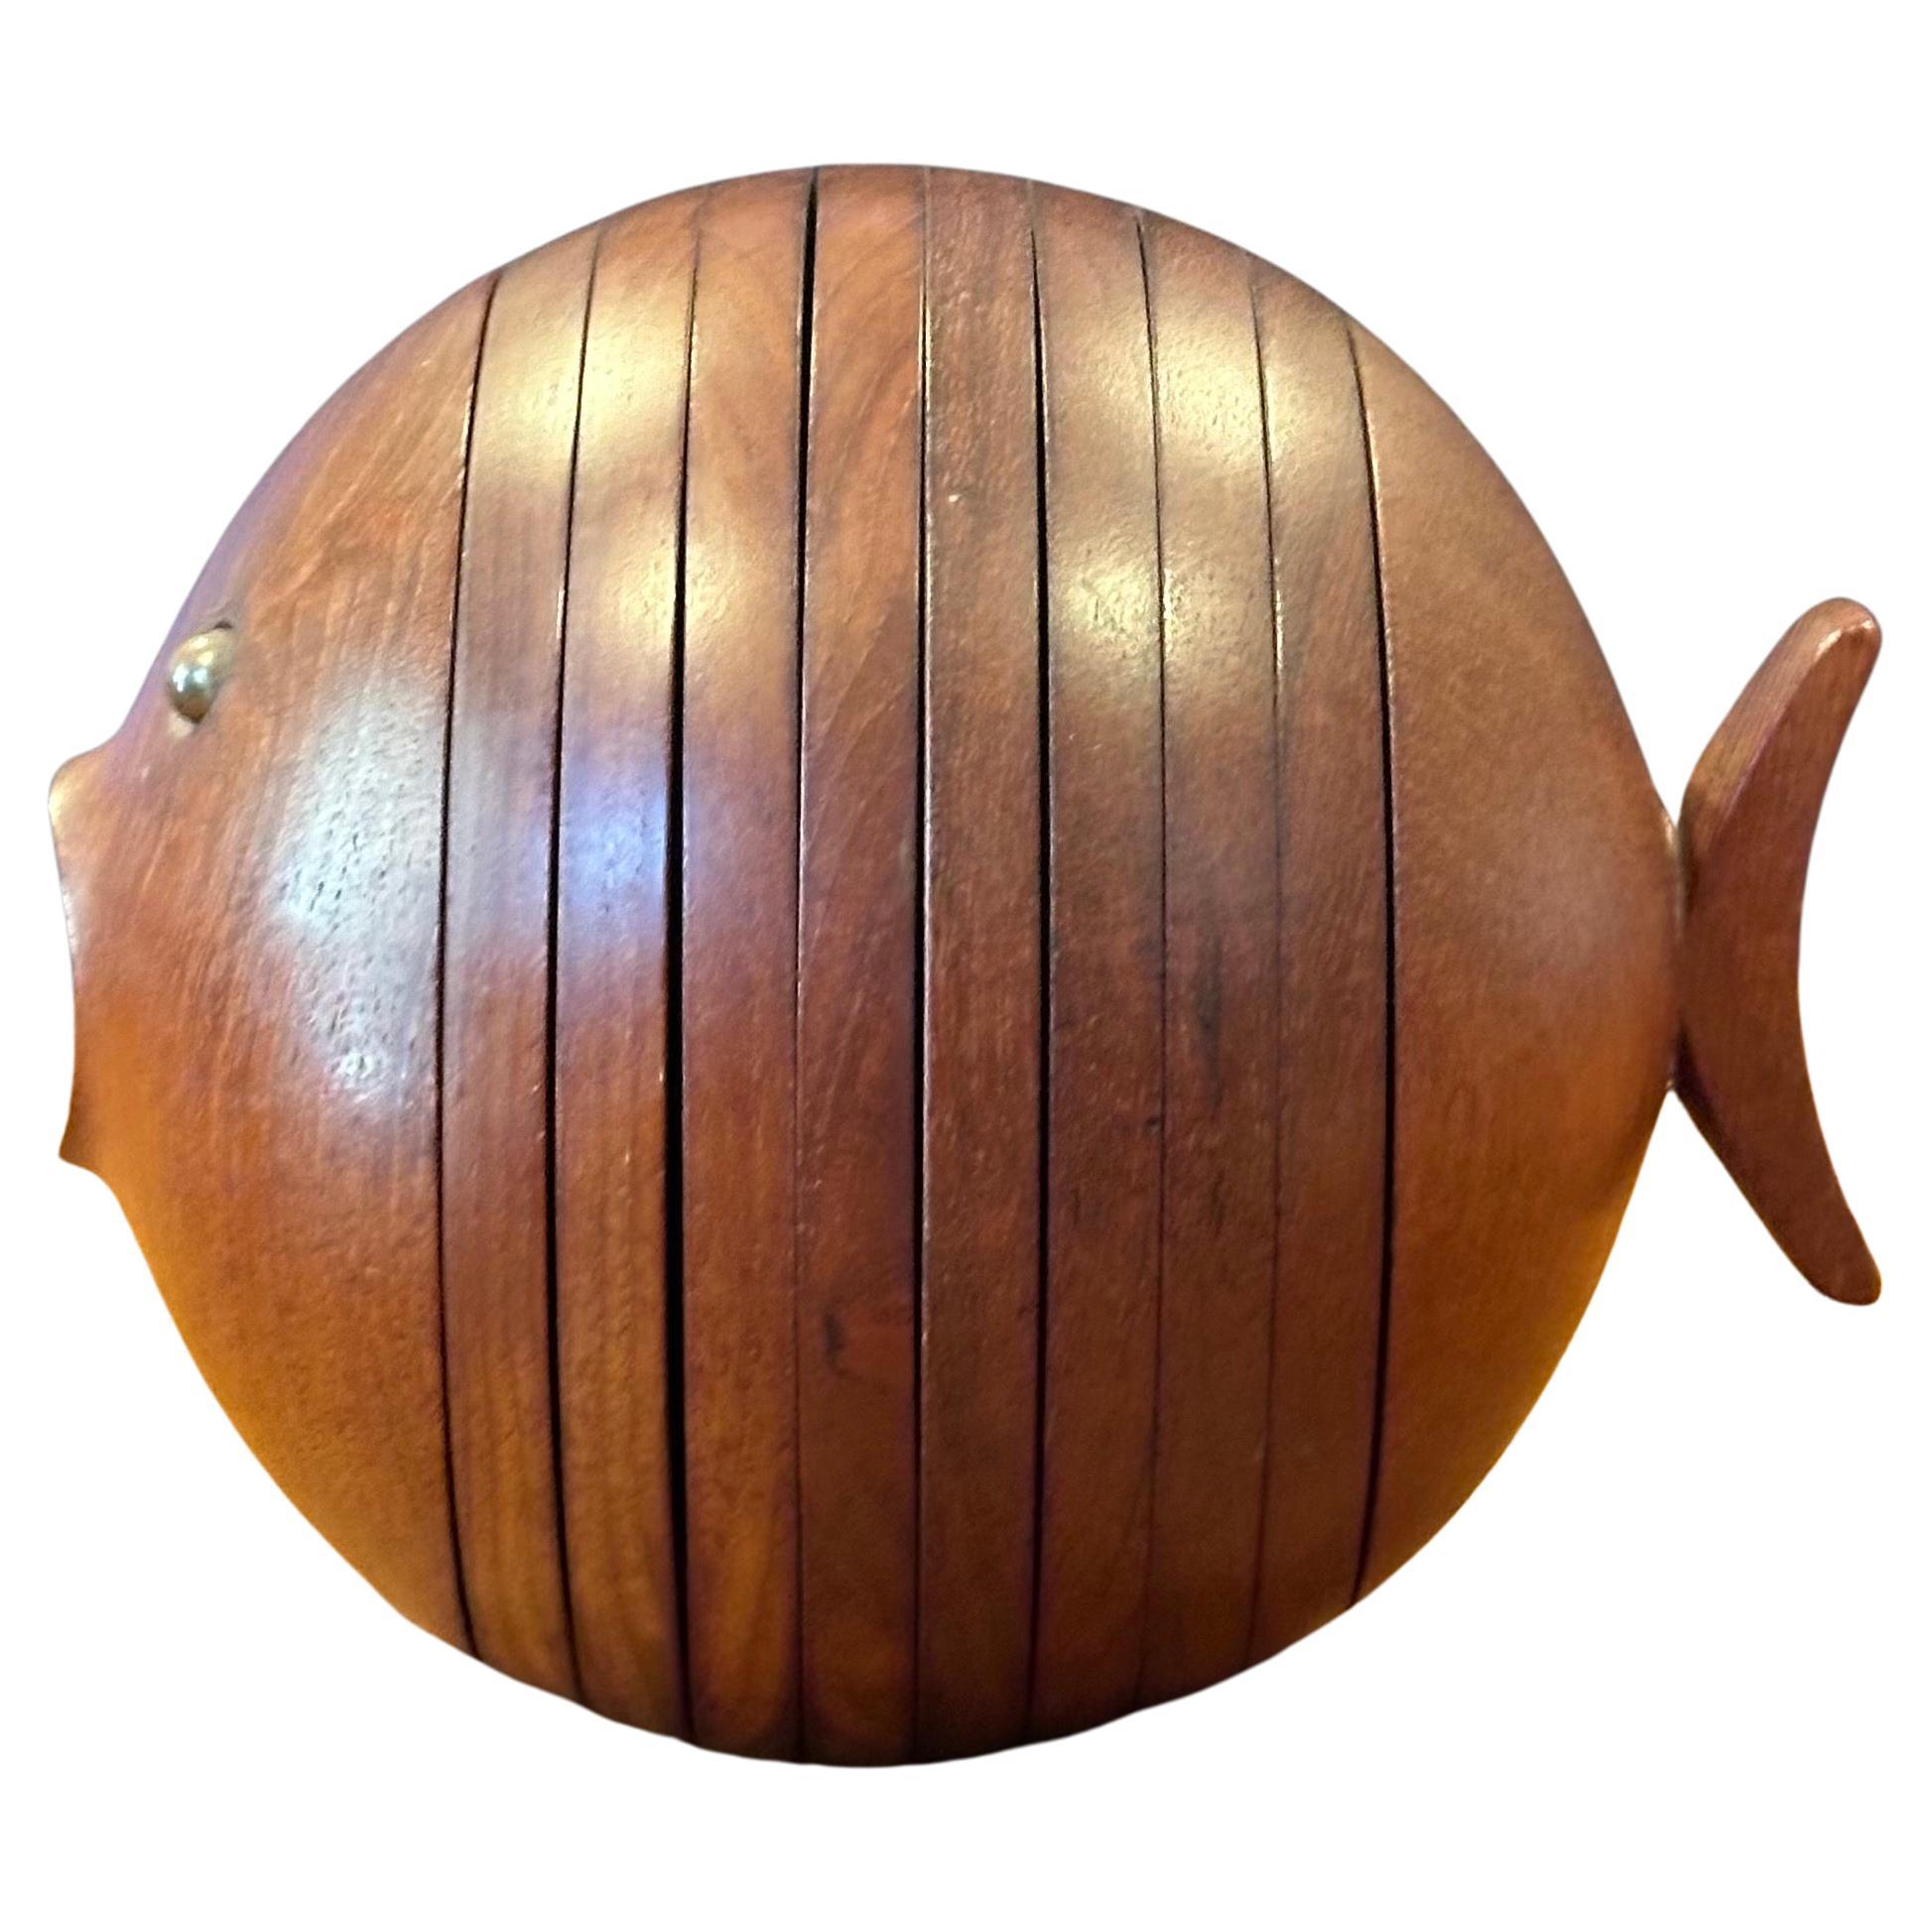 A classic and very hard to find Danish modern teak puffer fish coaster set by Ernst Henriksen, circa 1960s. The set has eight coaster sections that are secured via brass eyes (poles); the piece works as a functional coater set or a decorative piece